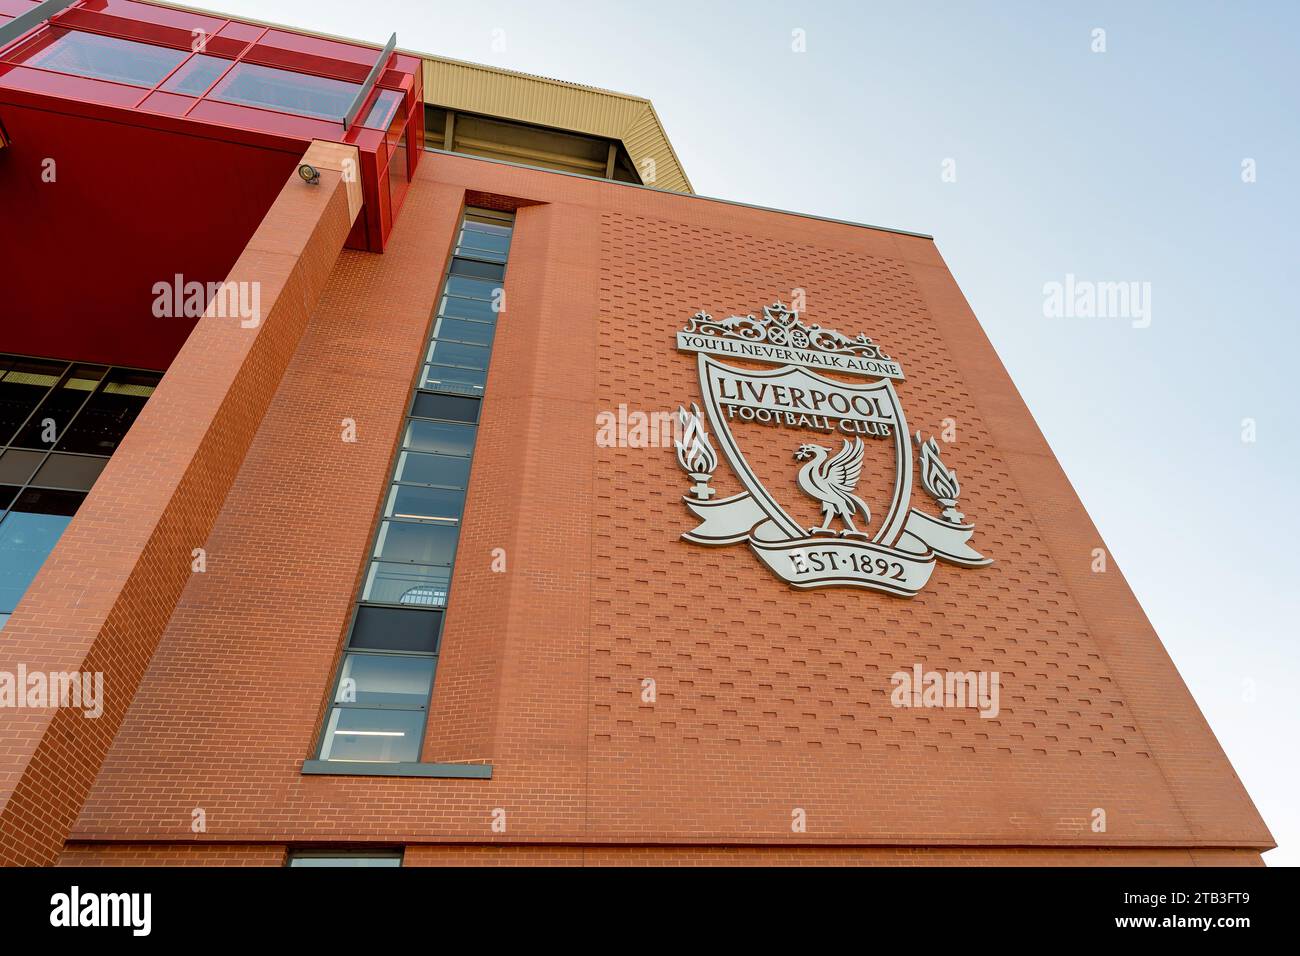 The crest or logo of Liverpool Football Club, Anfield Stadium Stock Photo